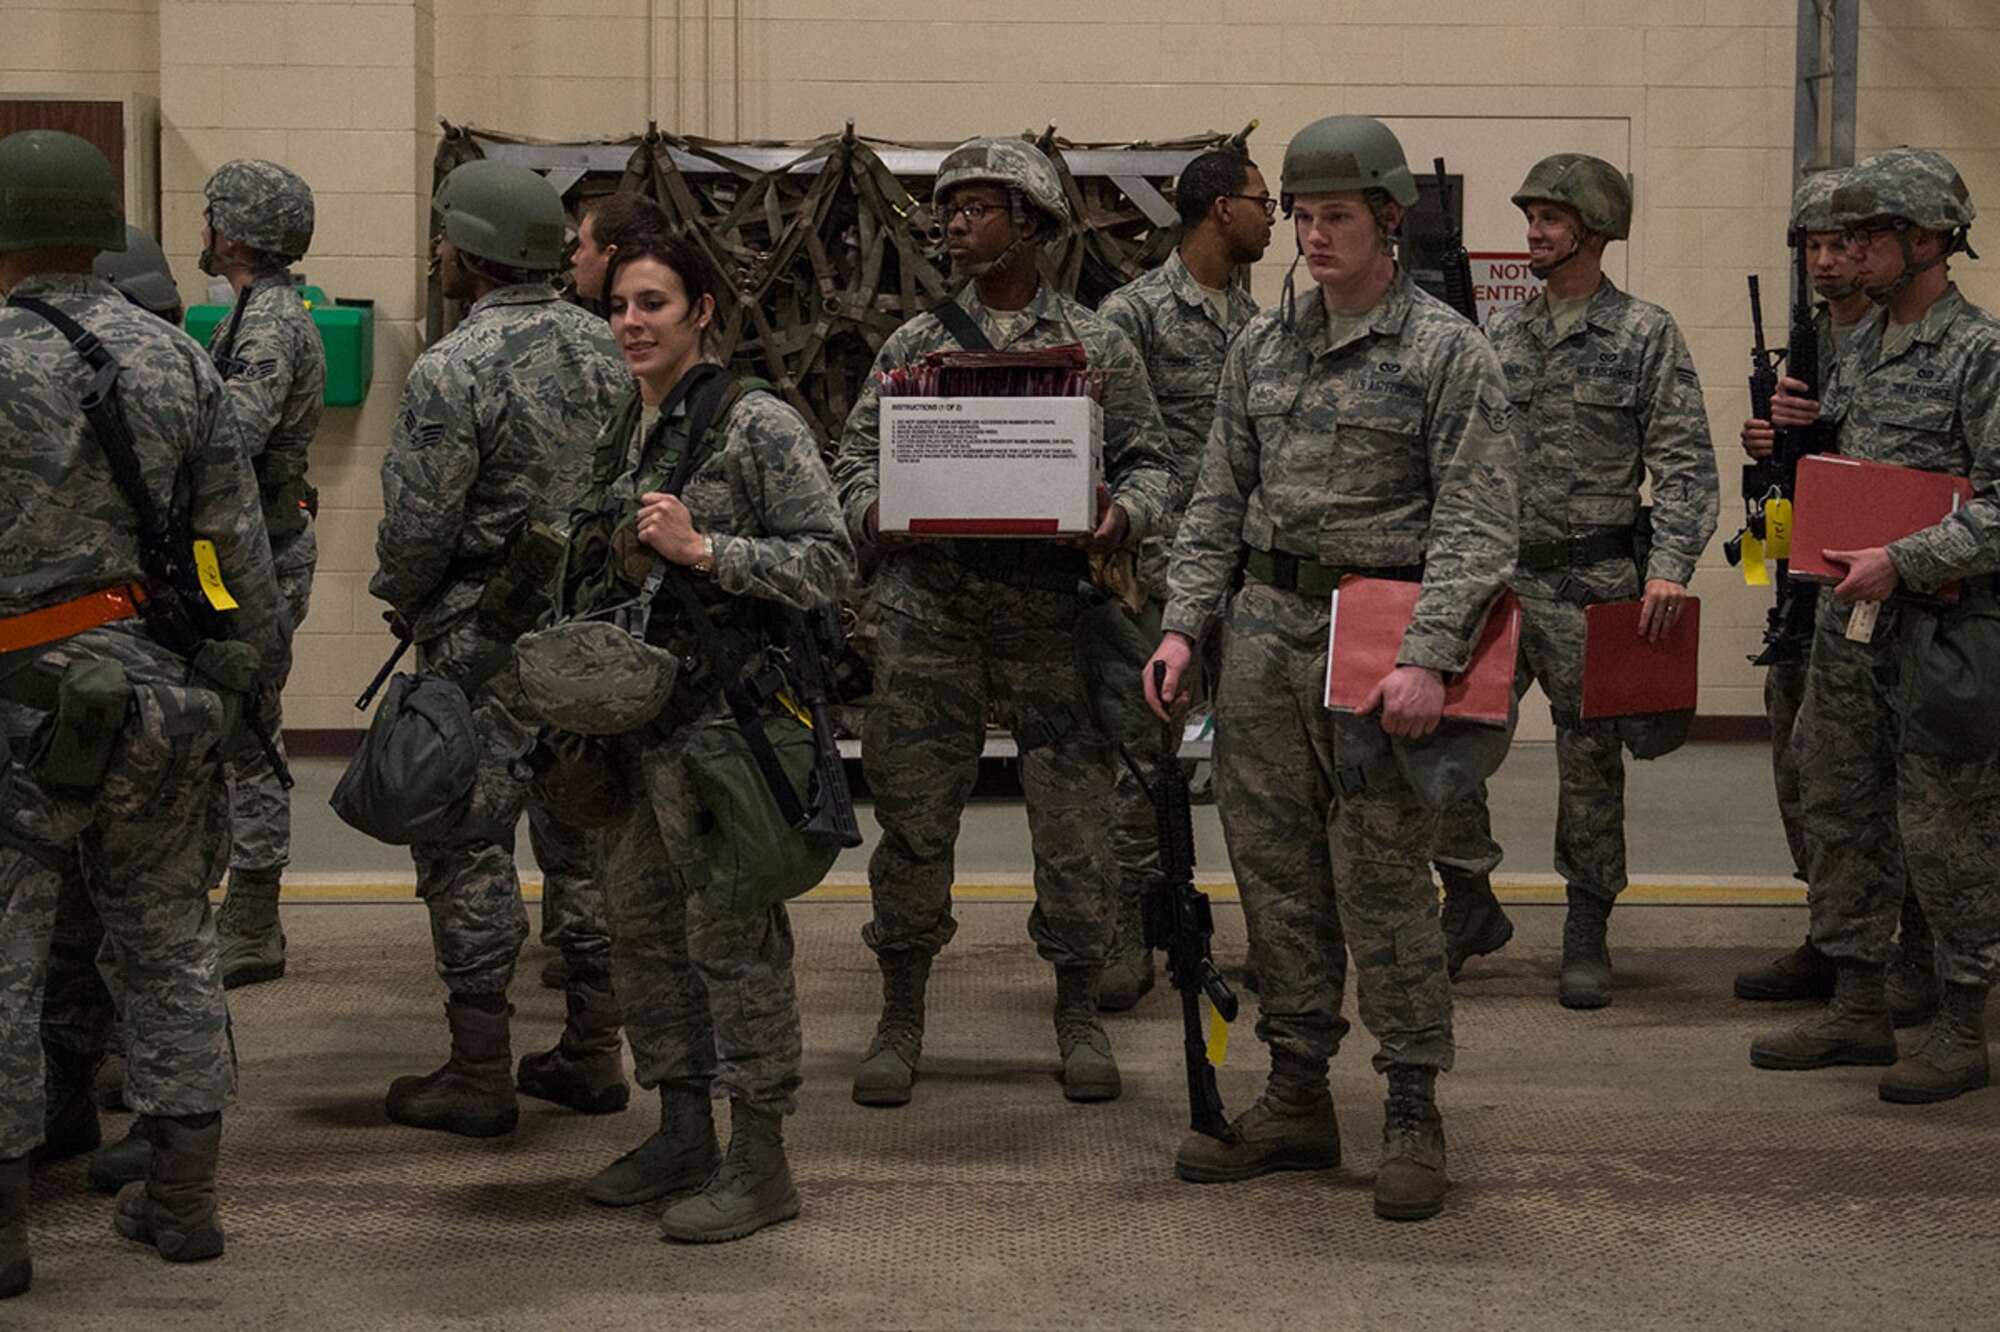 U.S. Air Force Airmen from Joint Base Elmendorf-Richardson exercise a mock deployment preparation, April 7, 2016.  JBER is host to air, space, and cyberspace systems which may be deployed or employed to support and defend the U.S. interests and those of our allies.  (U.S. Air Force photo by Senior Airman James Richardson)